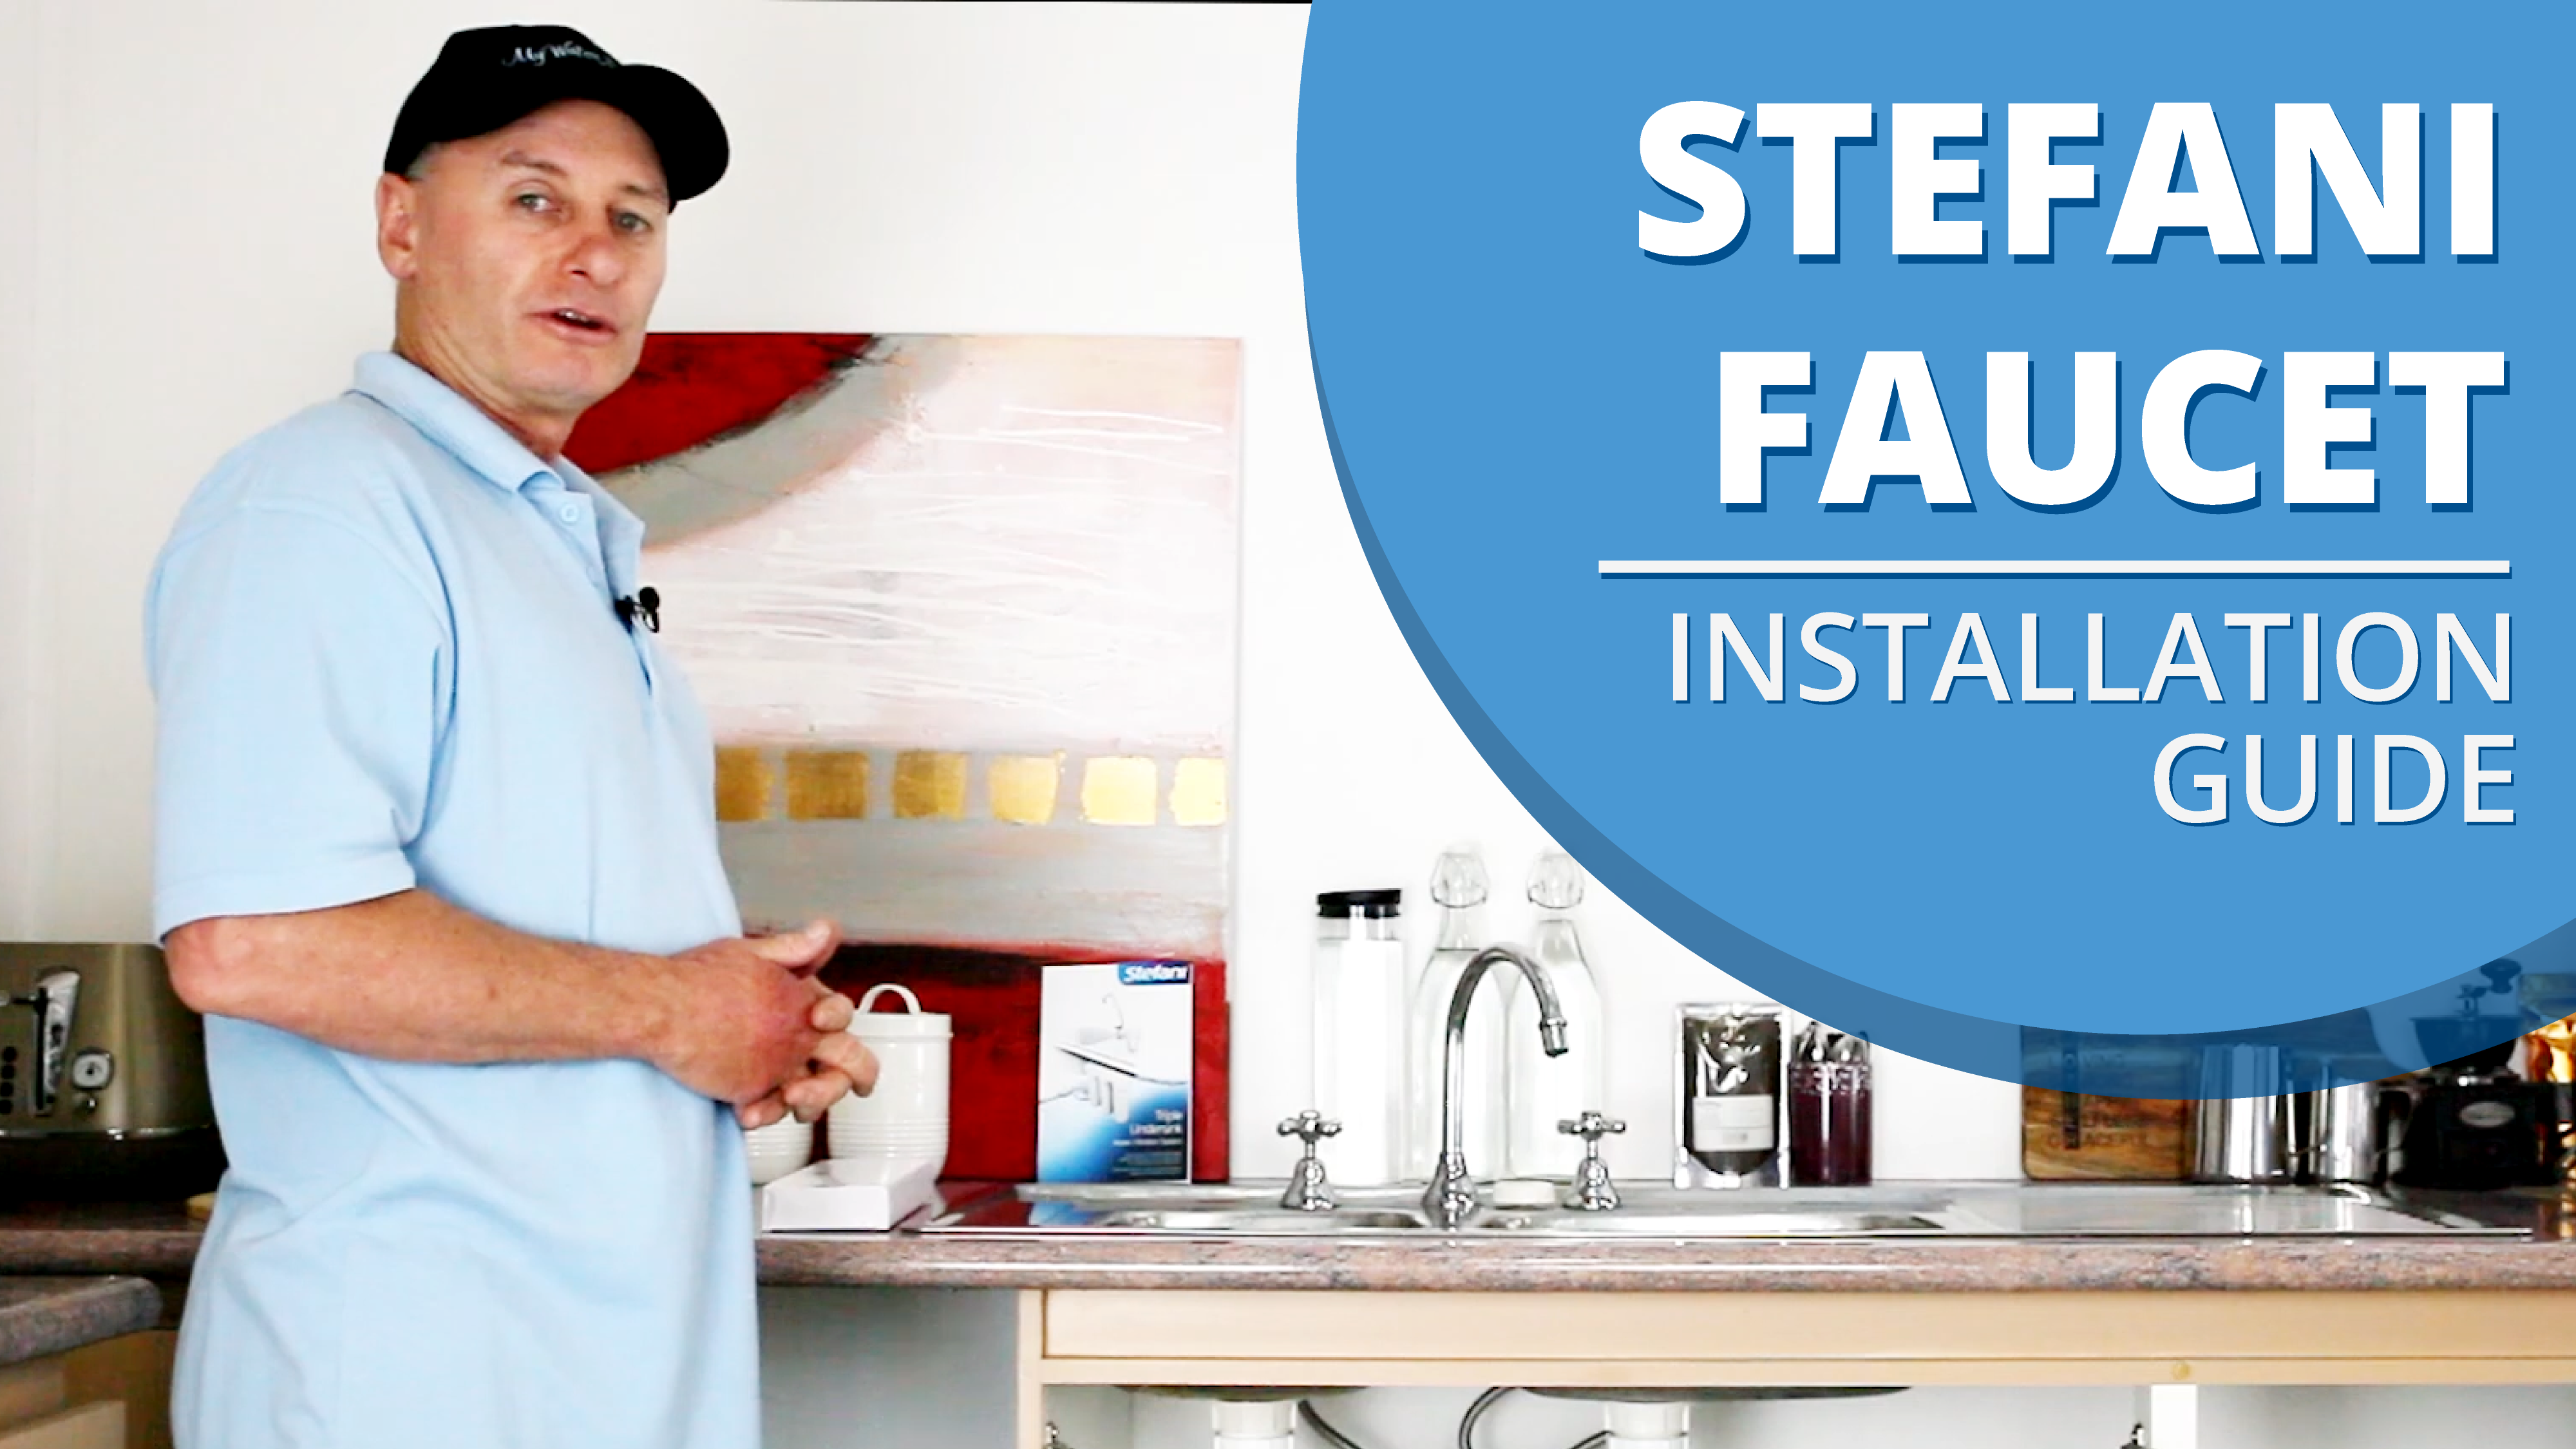 How to Install the Stefani Faucet [VIDEO]